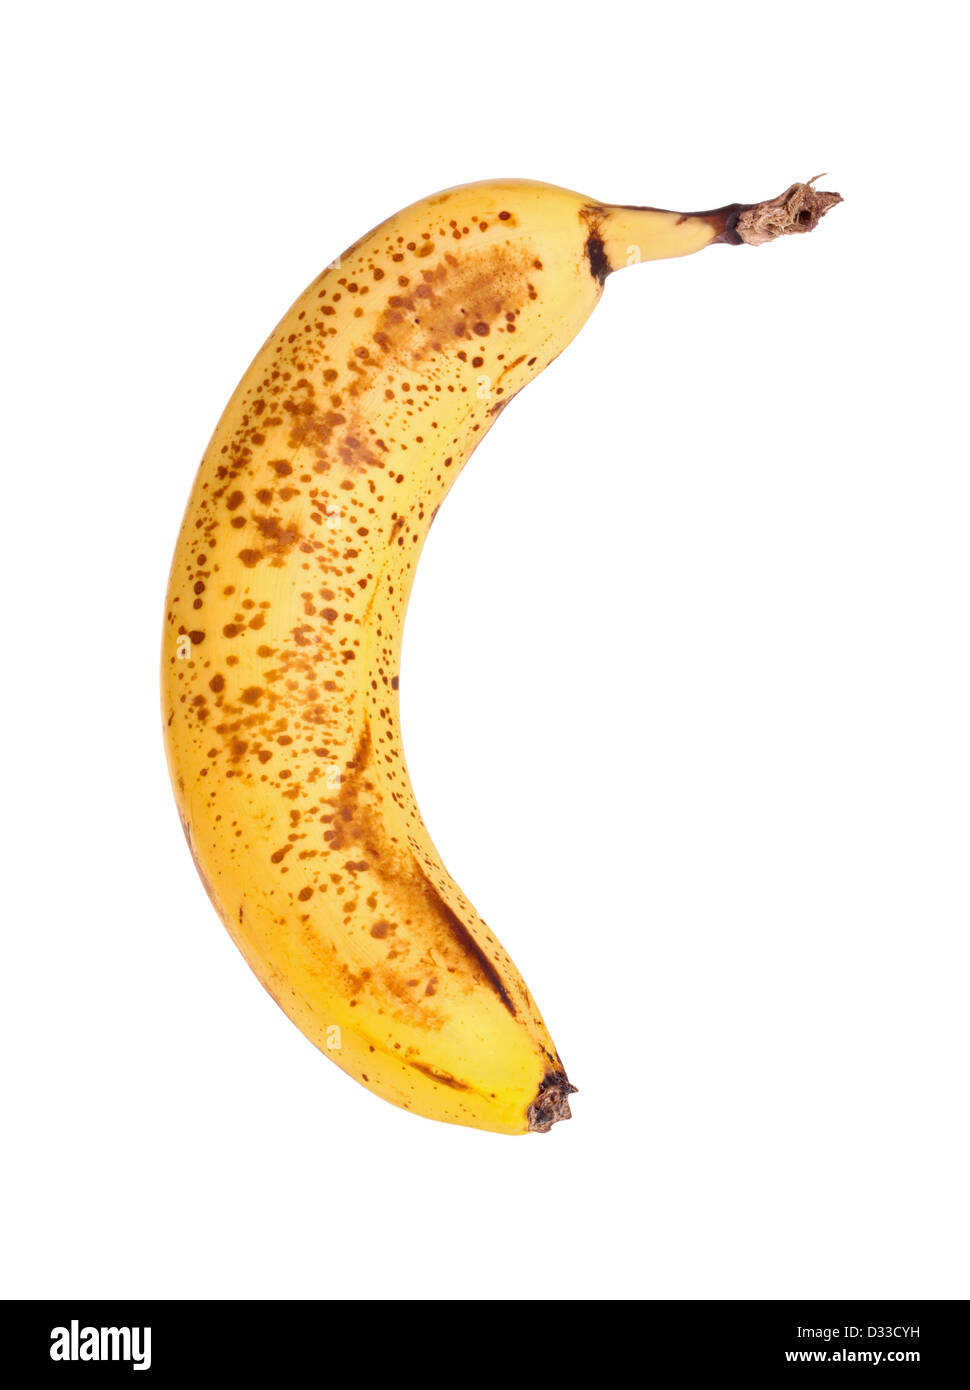 Perfectly ripe, brown-spotted banana isolated against a white background Stock Photo